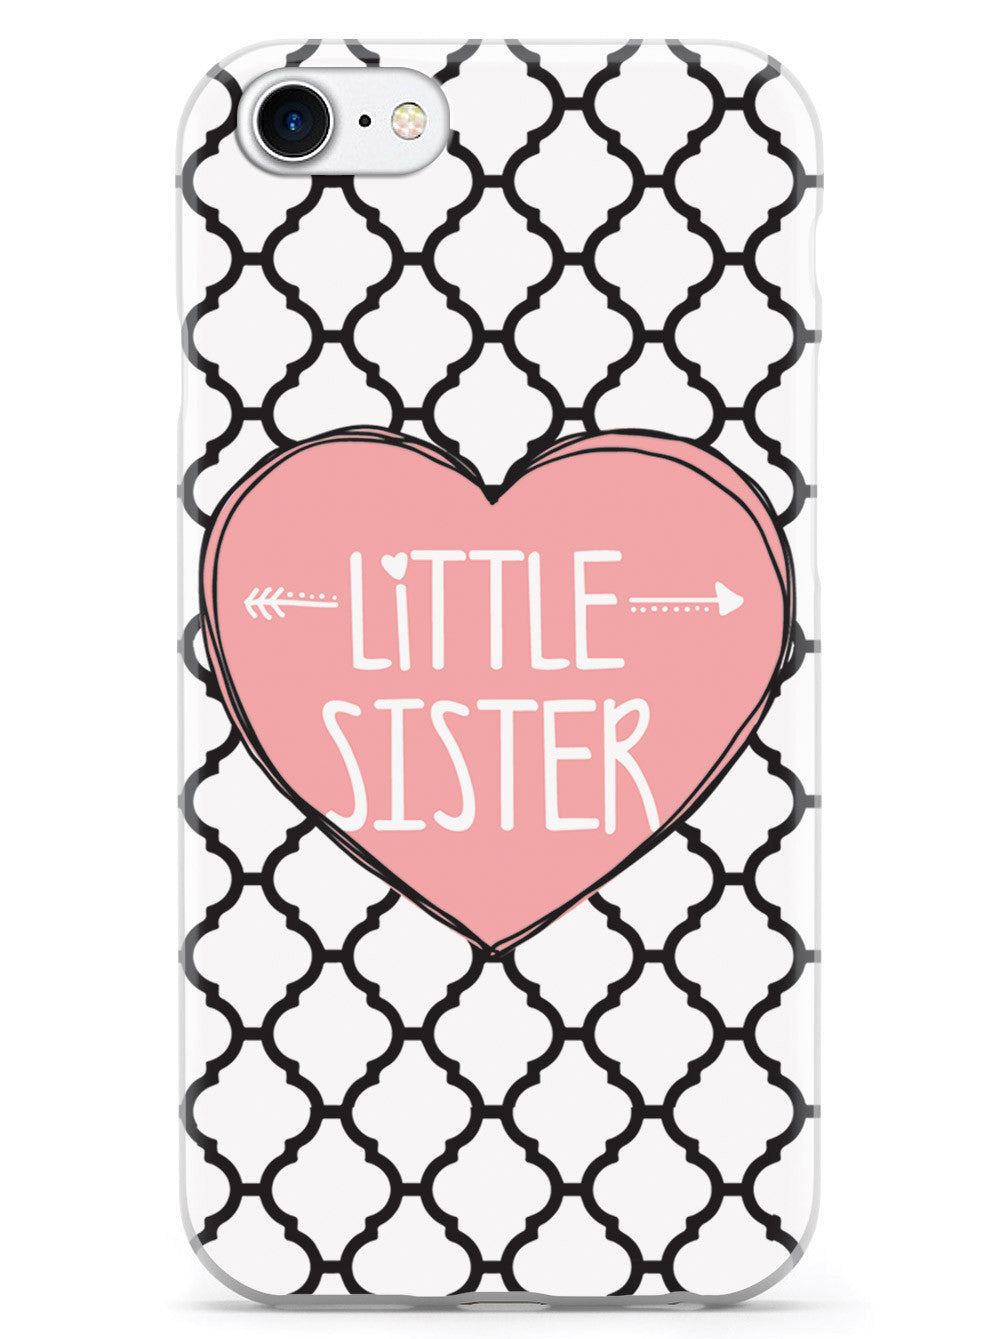 Sisterly Love - Little Sister - Moroccan Case